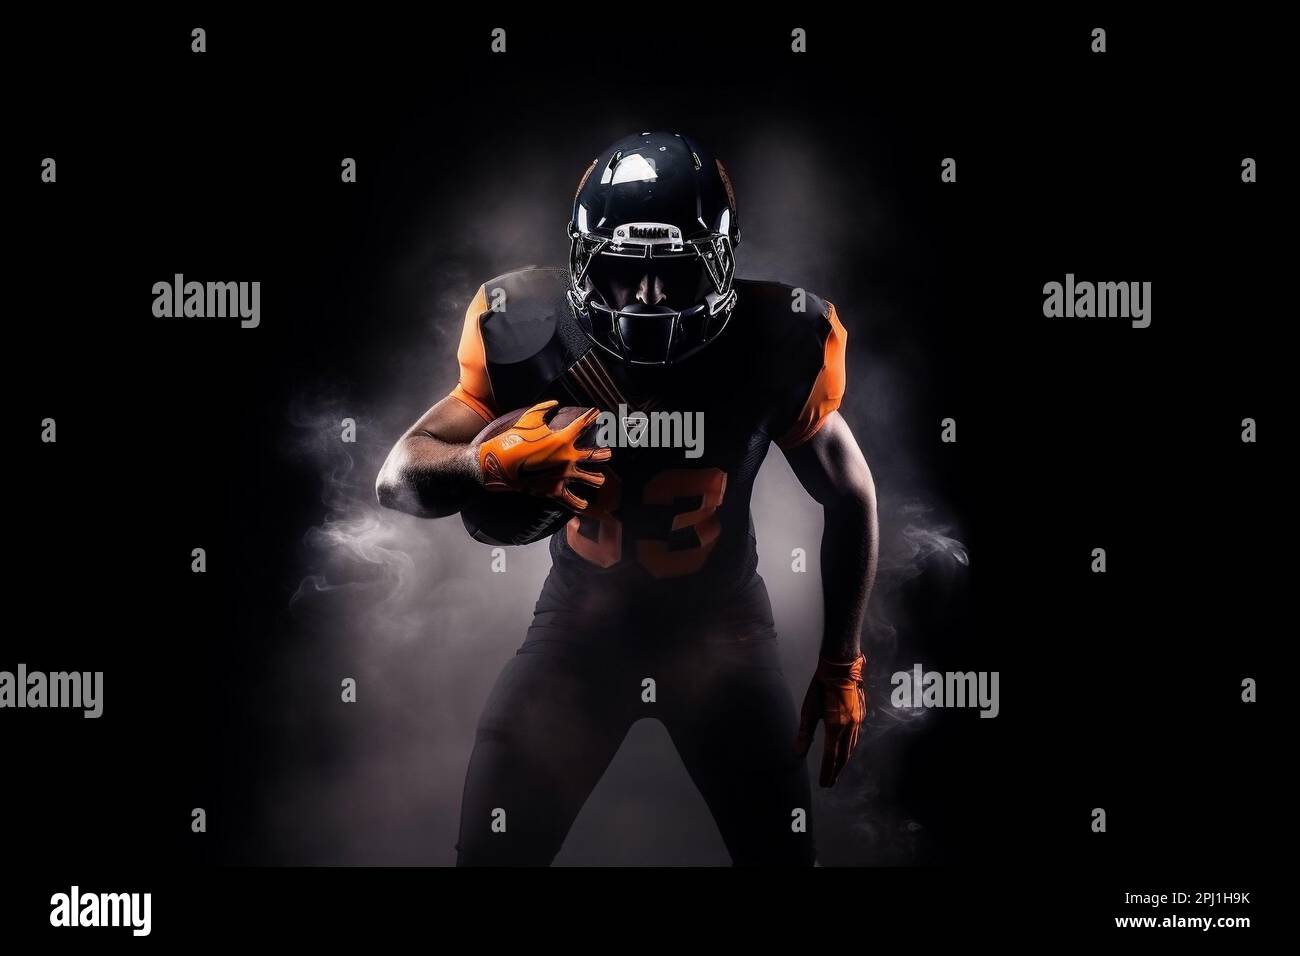 American football player on a dark background in smoke in black and orange equipment Stock Photo